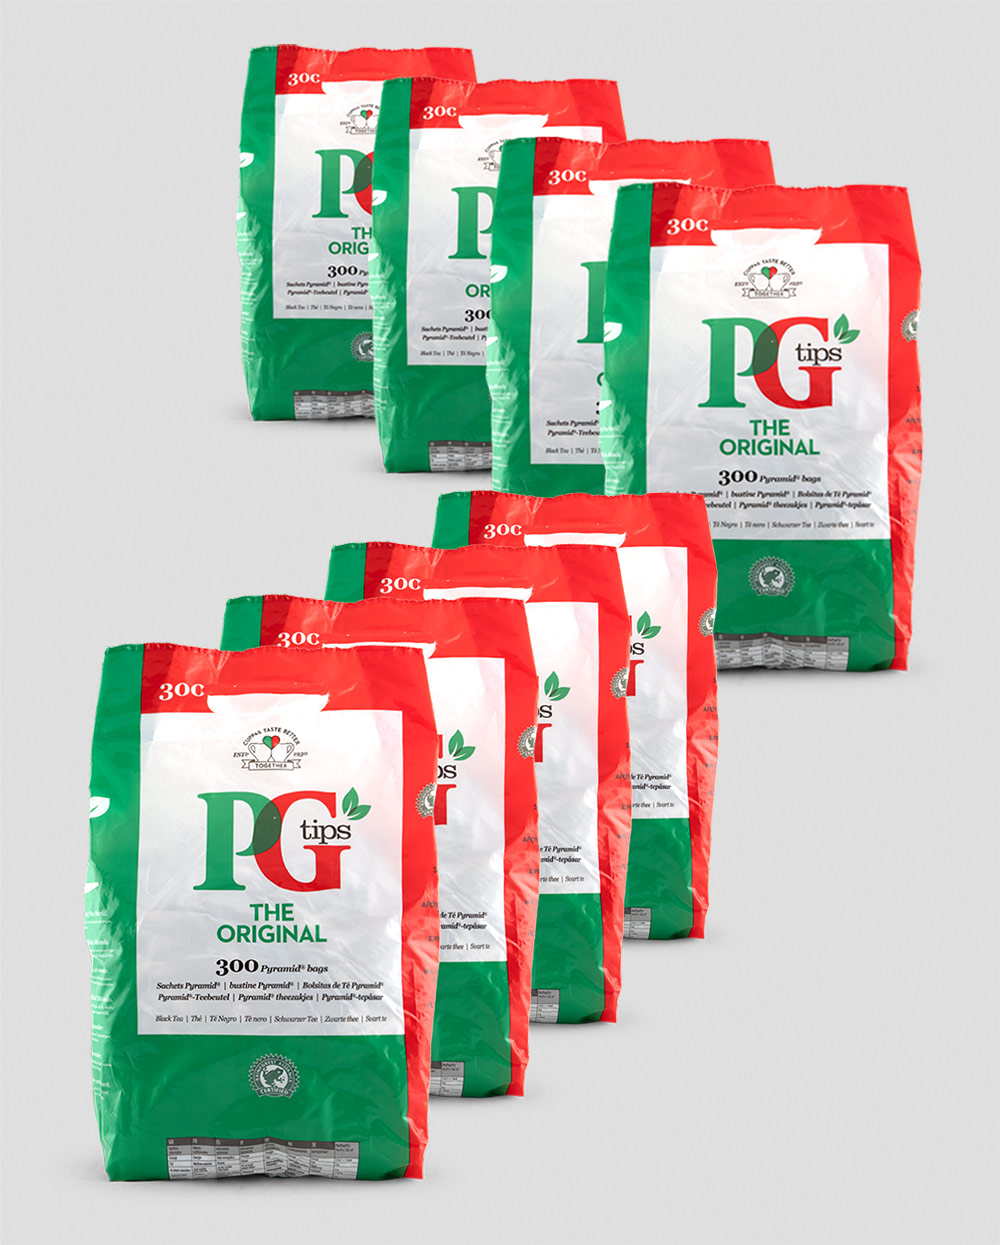 PG Tips - The Original 8 x 300s Pyramid Teabags